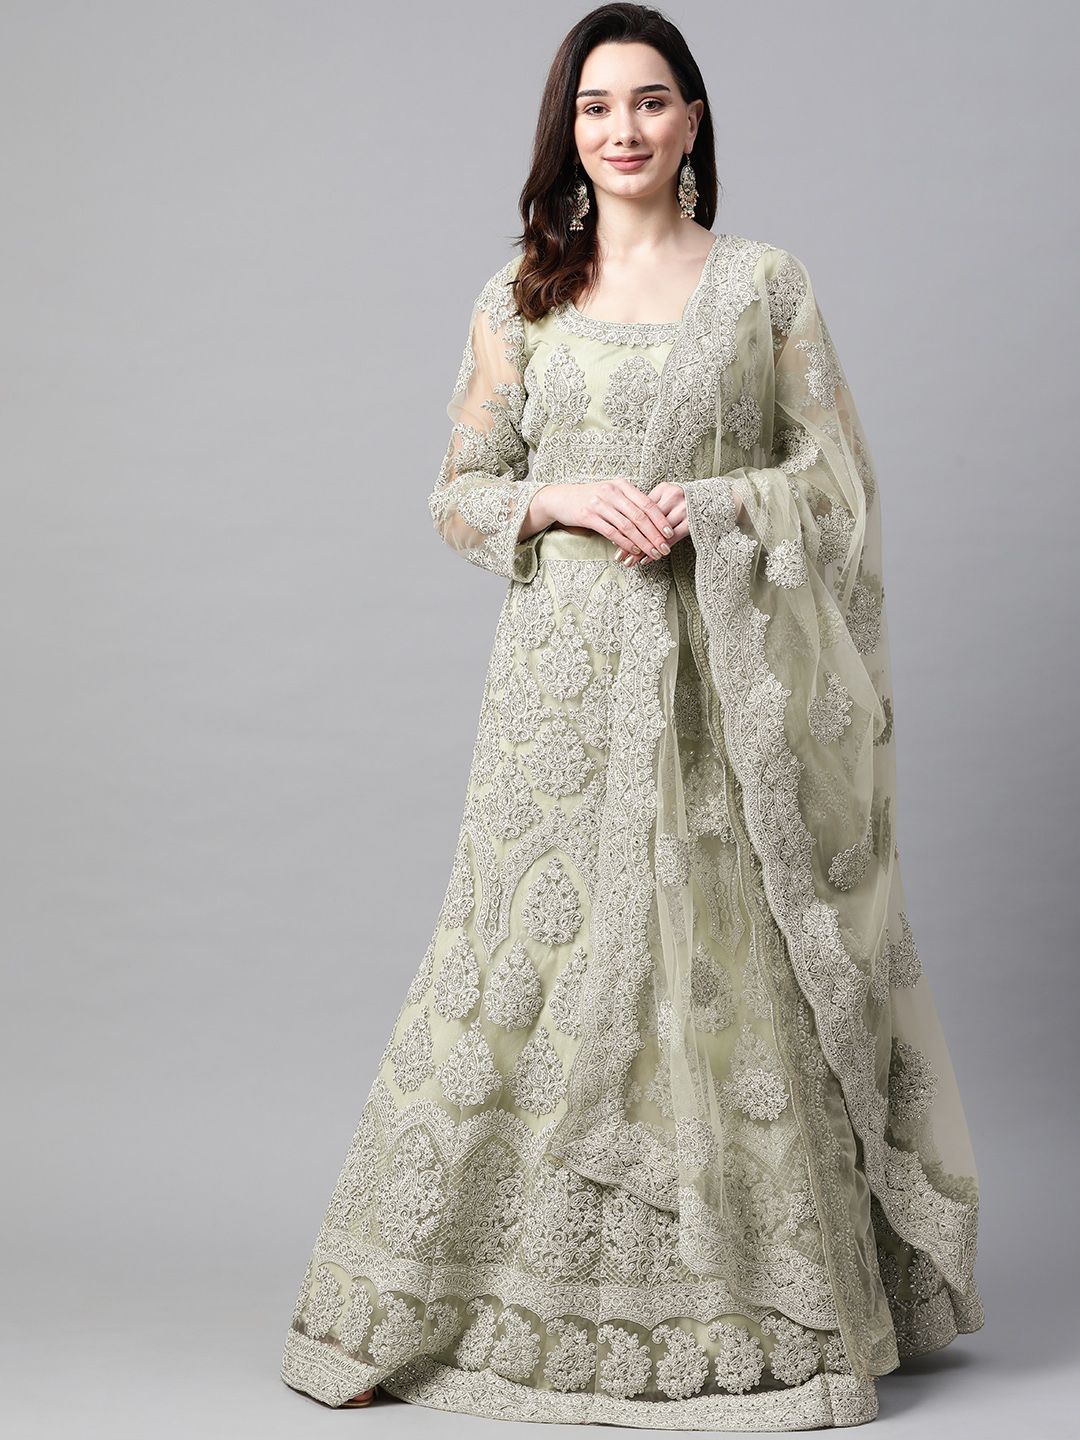 Readiprint Fashions Green Embroidered Semi-Stitched Lehenga & Blouse with Dupatta Price in India